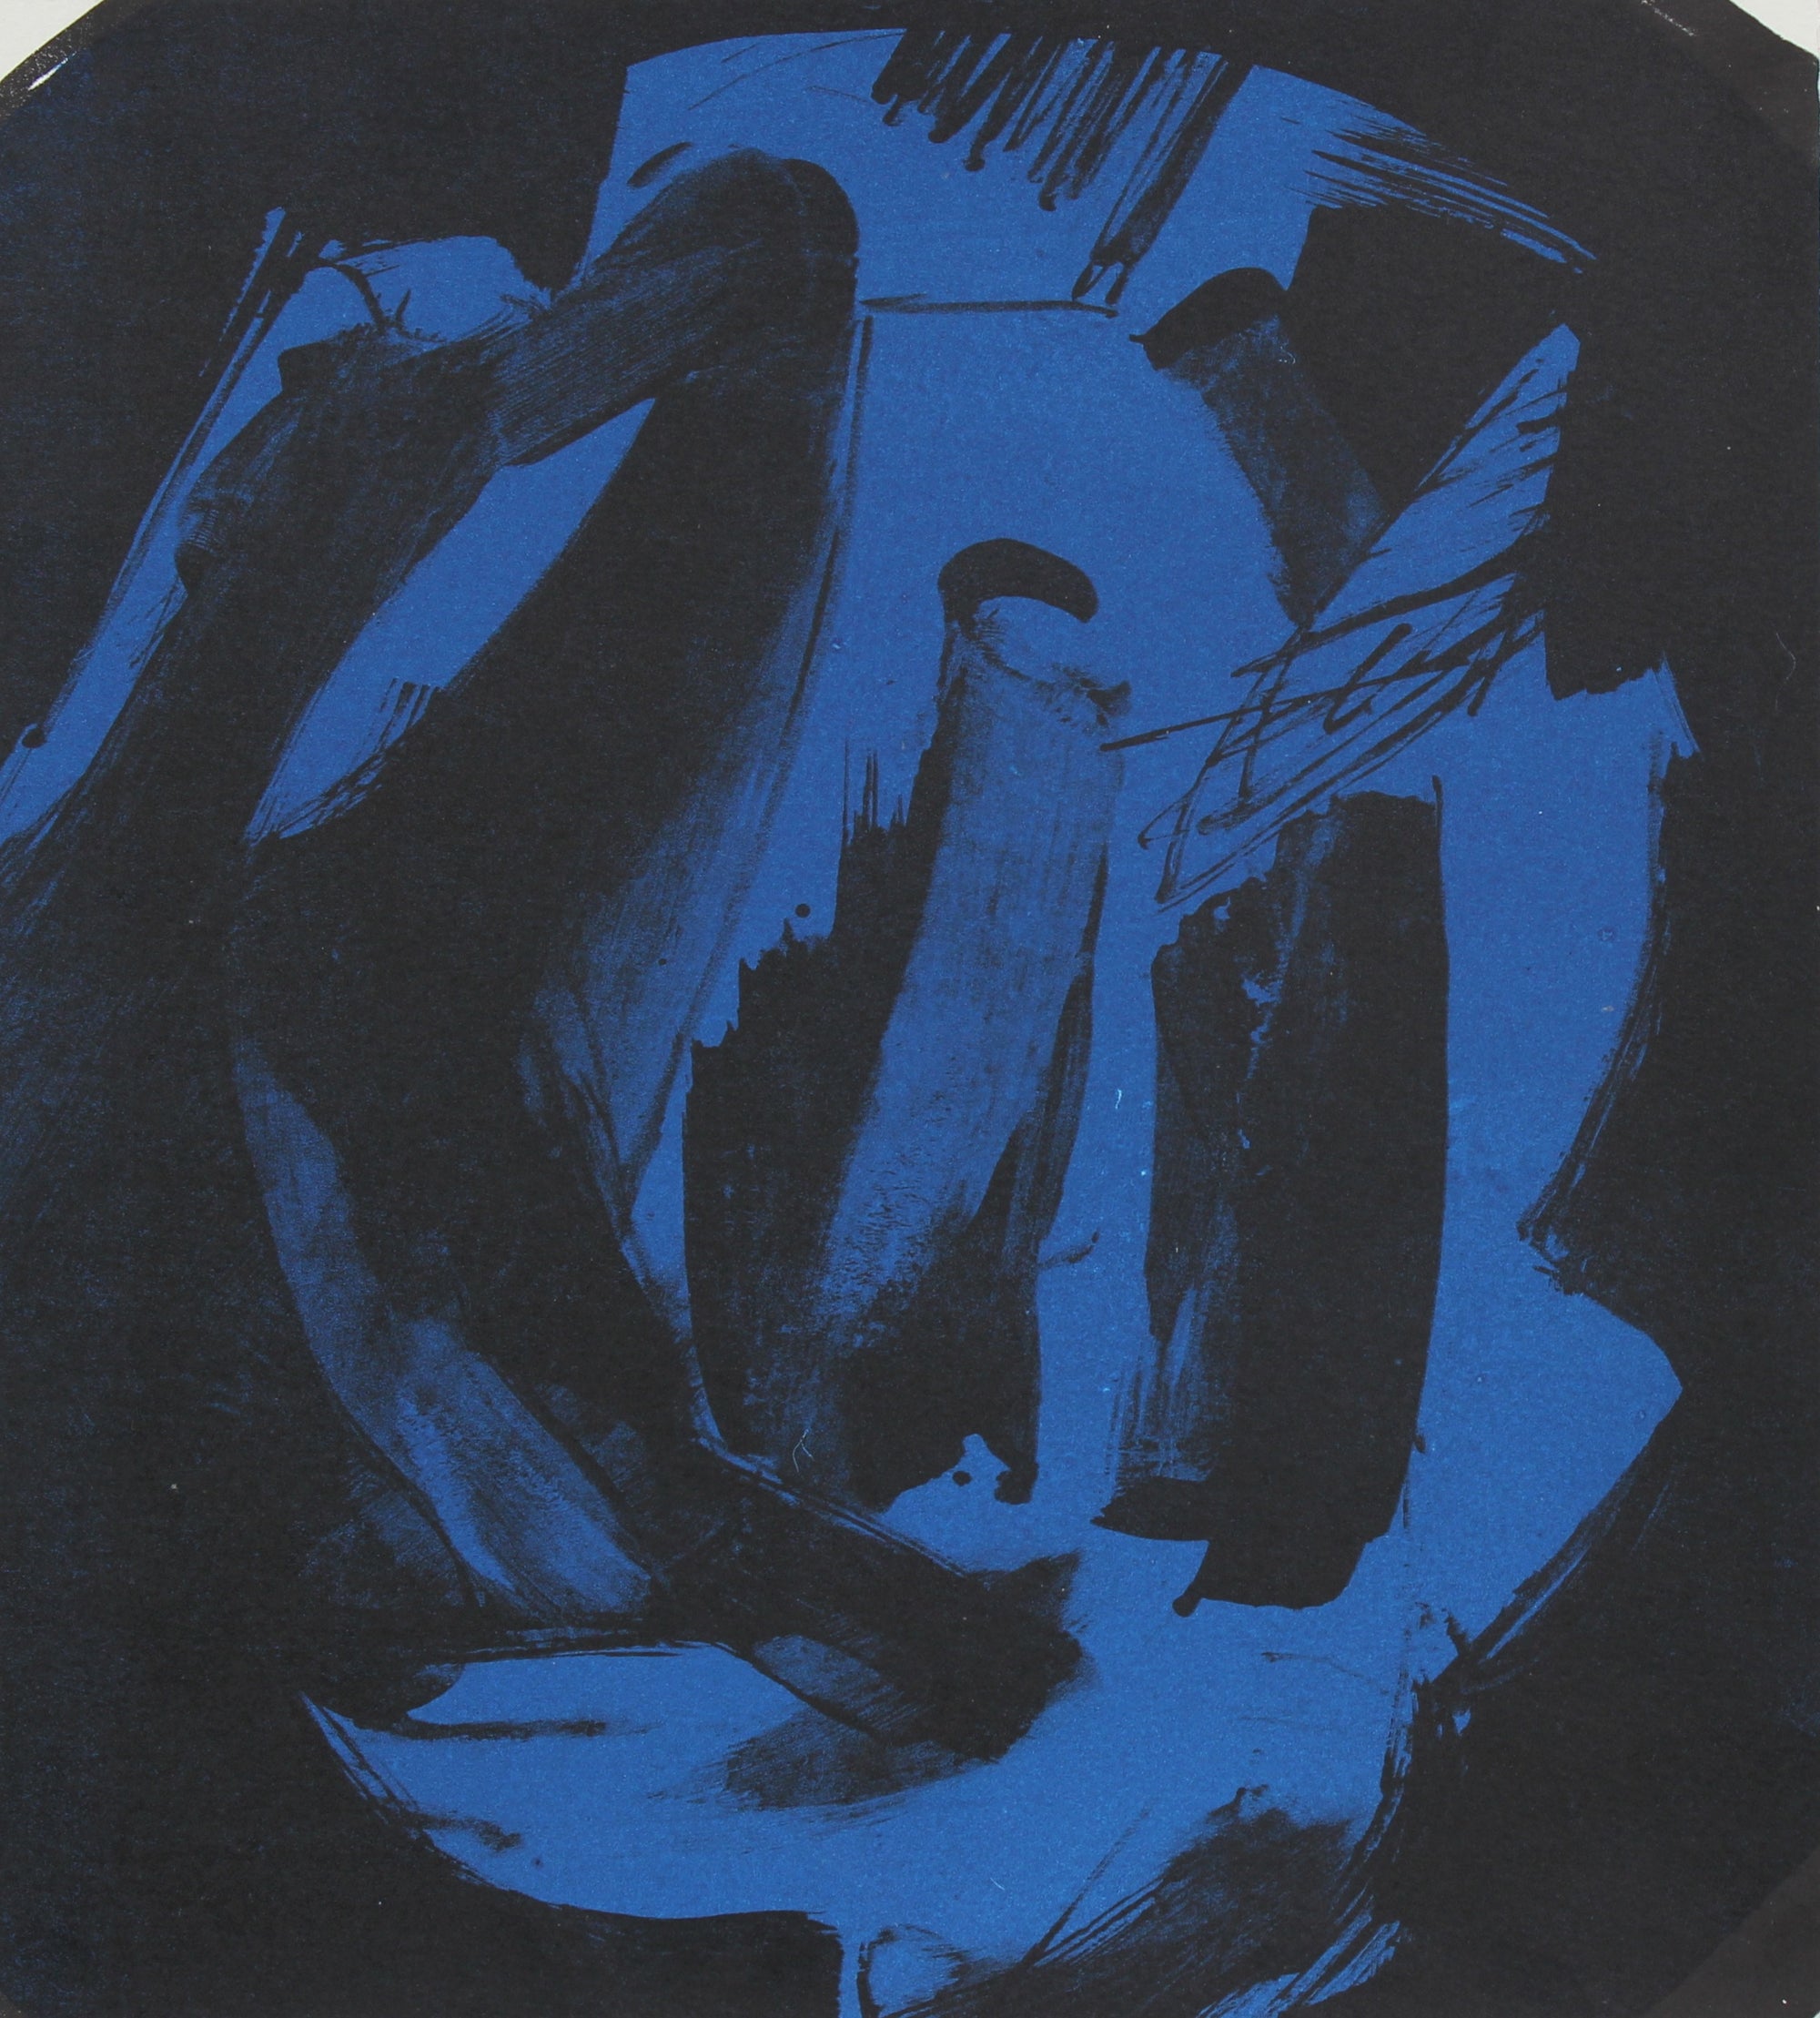 Abstract Print in Blue and Black<br>1997 Lithograph <br><br>#96831